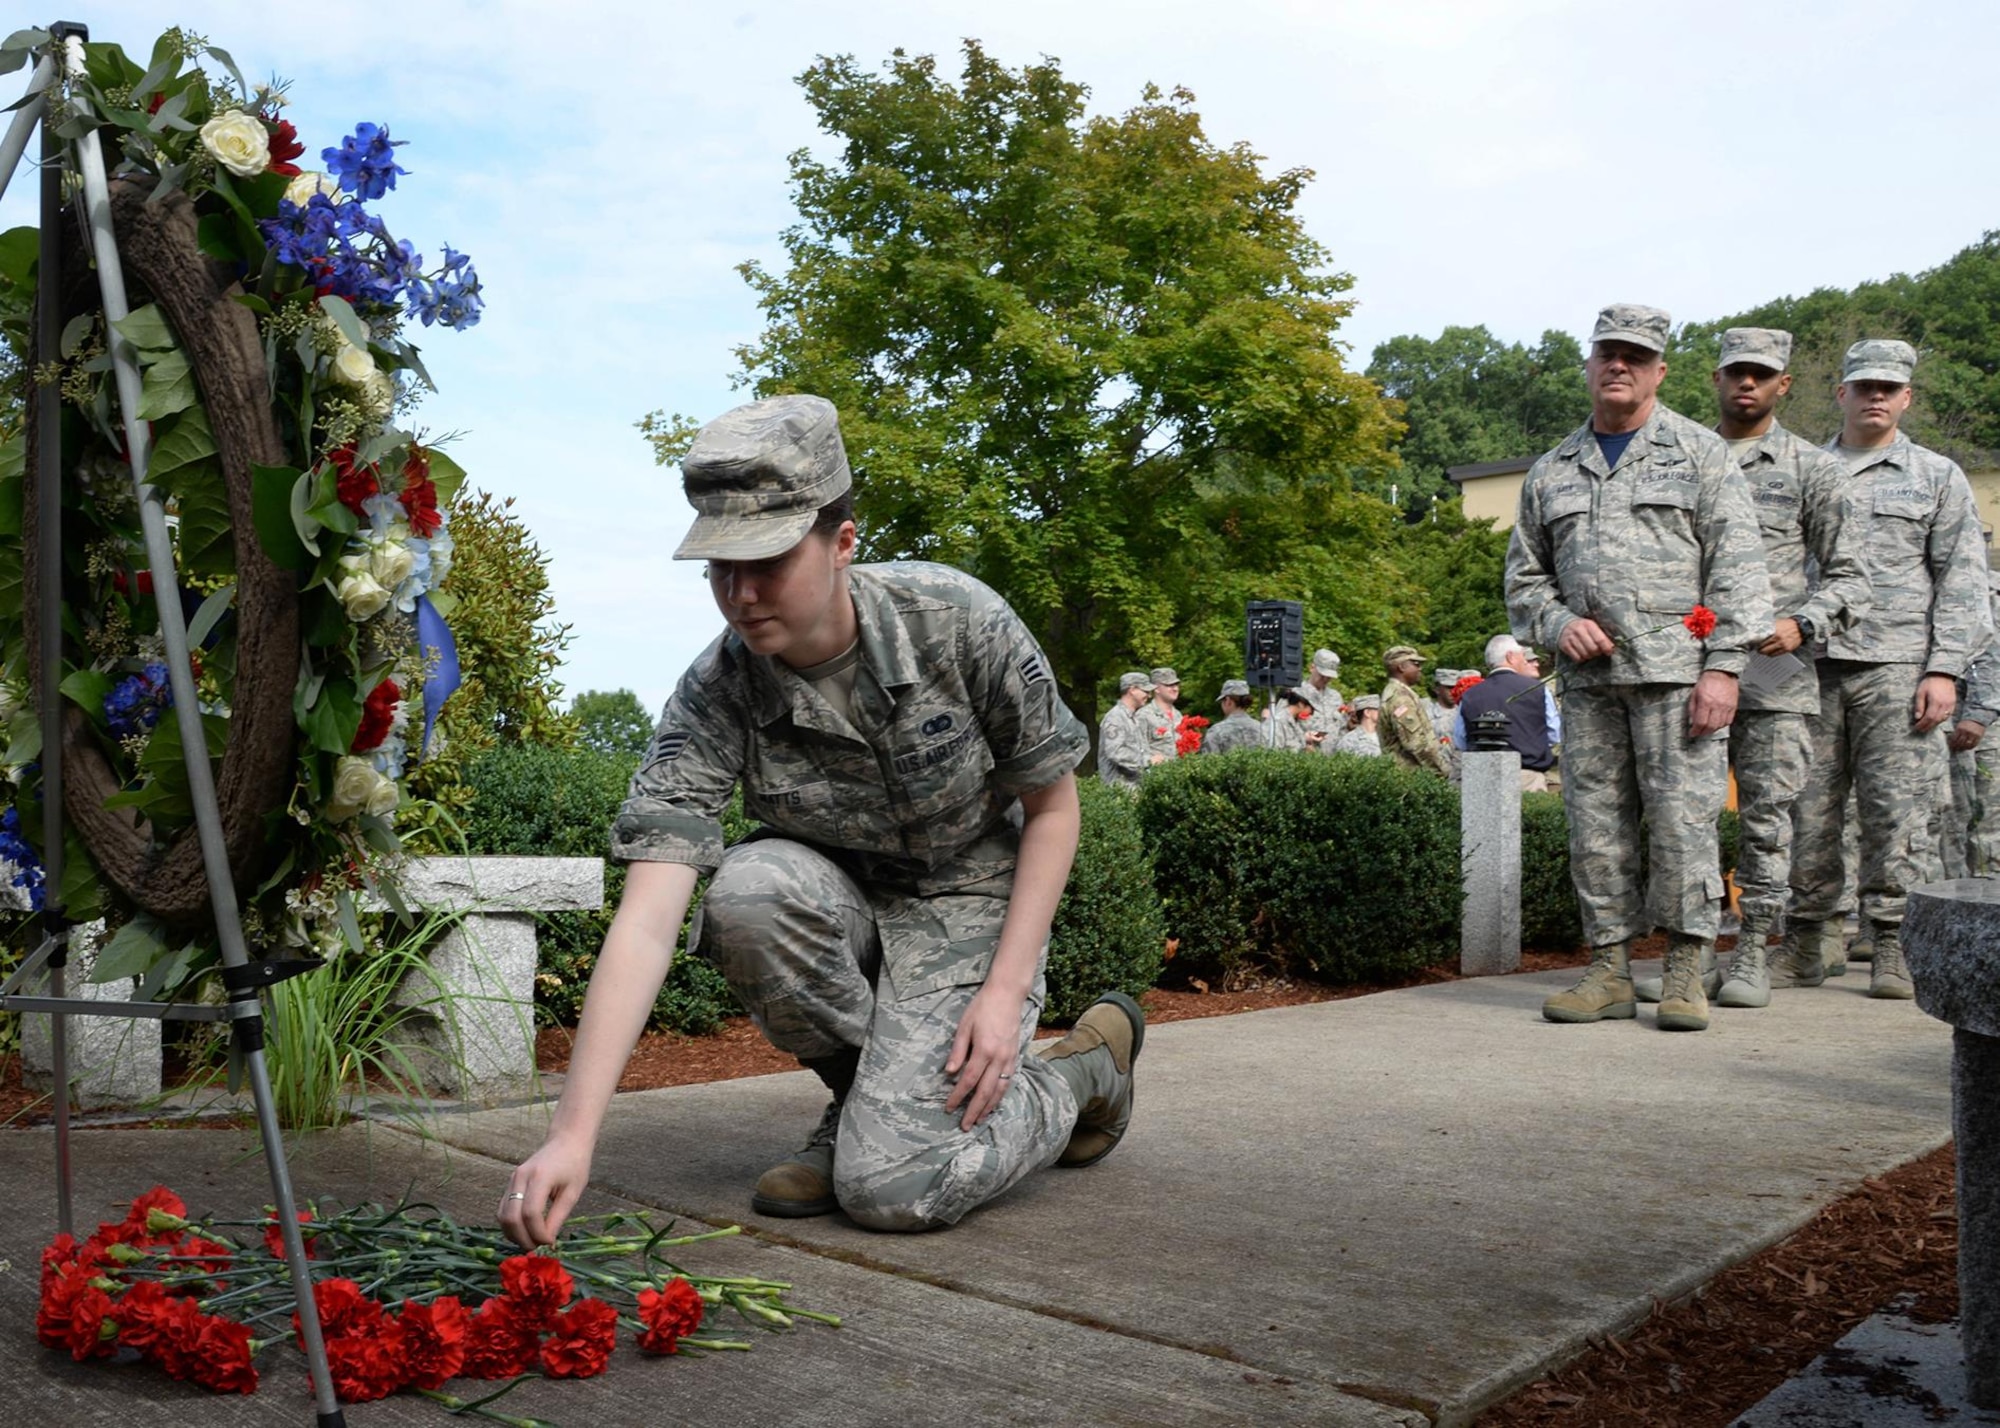 Senior Airman Kara Watts, 66th Air Base Group administration specialist, places a carnation near a wreath following the 15th Anniversary Memorial Remembrance at Hanscom Air Force Base, Mass., Sept. 9. The ceremony was held in remembrance of those who lost their lives on Sept. 11, 2001. (U.S. Air Force photo by Linda LaBonte Britt )